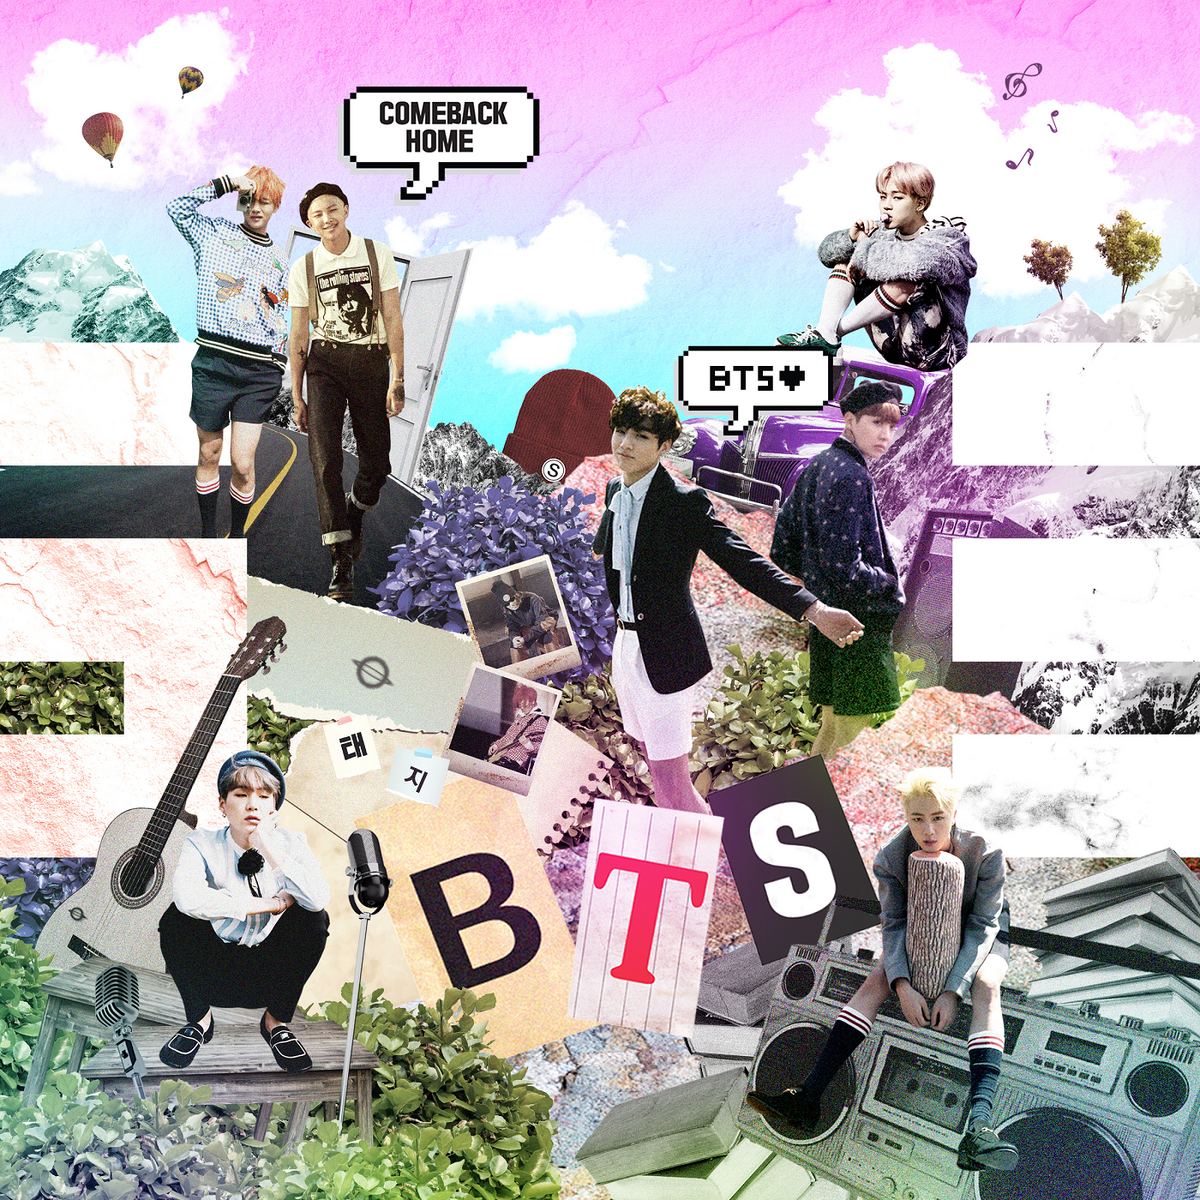 He comes back home. Come back Home BTS обложка. БТС камбэк хоум. Yet to come BTS обложка. Home BTS альбом.